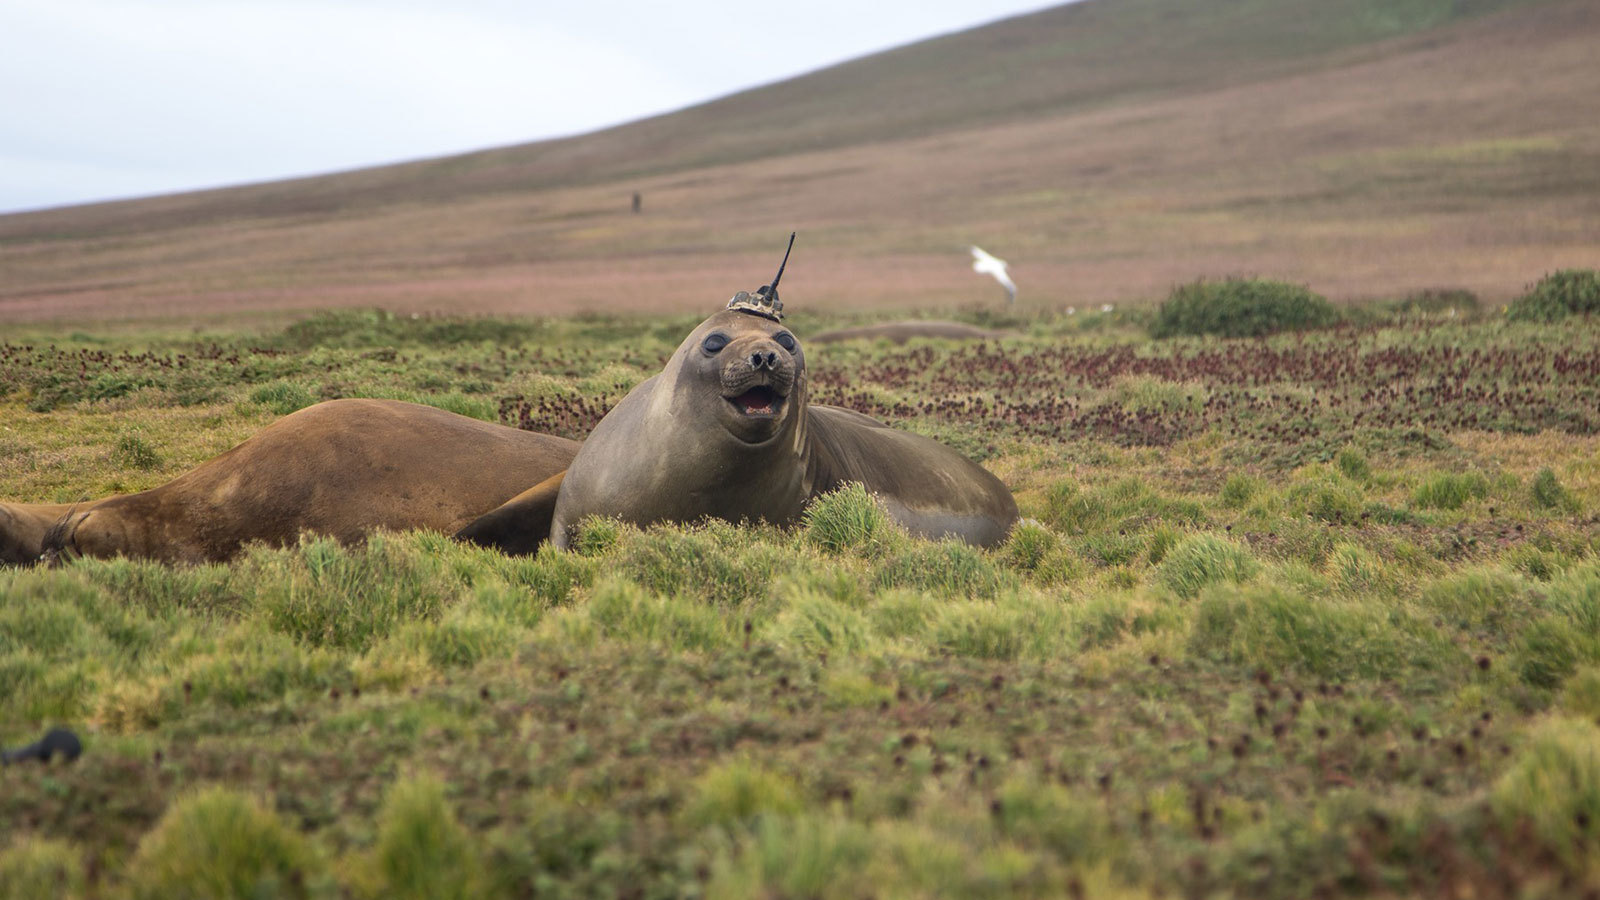 A tagged elephant seal basks on Kerguelen Island, a French territory in the Antarctic. Elephant seals are tagged as part of a French research program called SO-MEMO (Observing System - Mammals as Samplers of the Ocean Environment), operated by the French National Center for Scientific Research (CNRS). The tags — actually, sensors with antennas — are glued to the seals' heads in accordance with established ethical standards when the animals come ashore either to breed or to molt. The researchers remove the tags to retrieve their data when the seals return to land. If they miss a tag, it drops off with the dead skin in the next molting season. Credit: Sorbonne University/Etienne Pauthenet